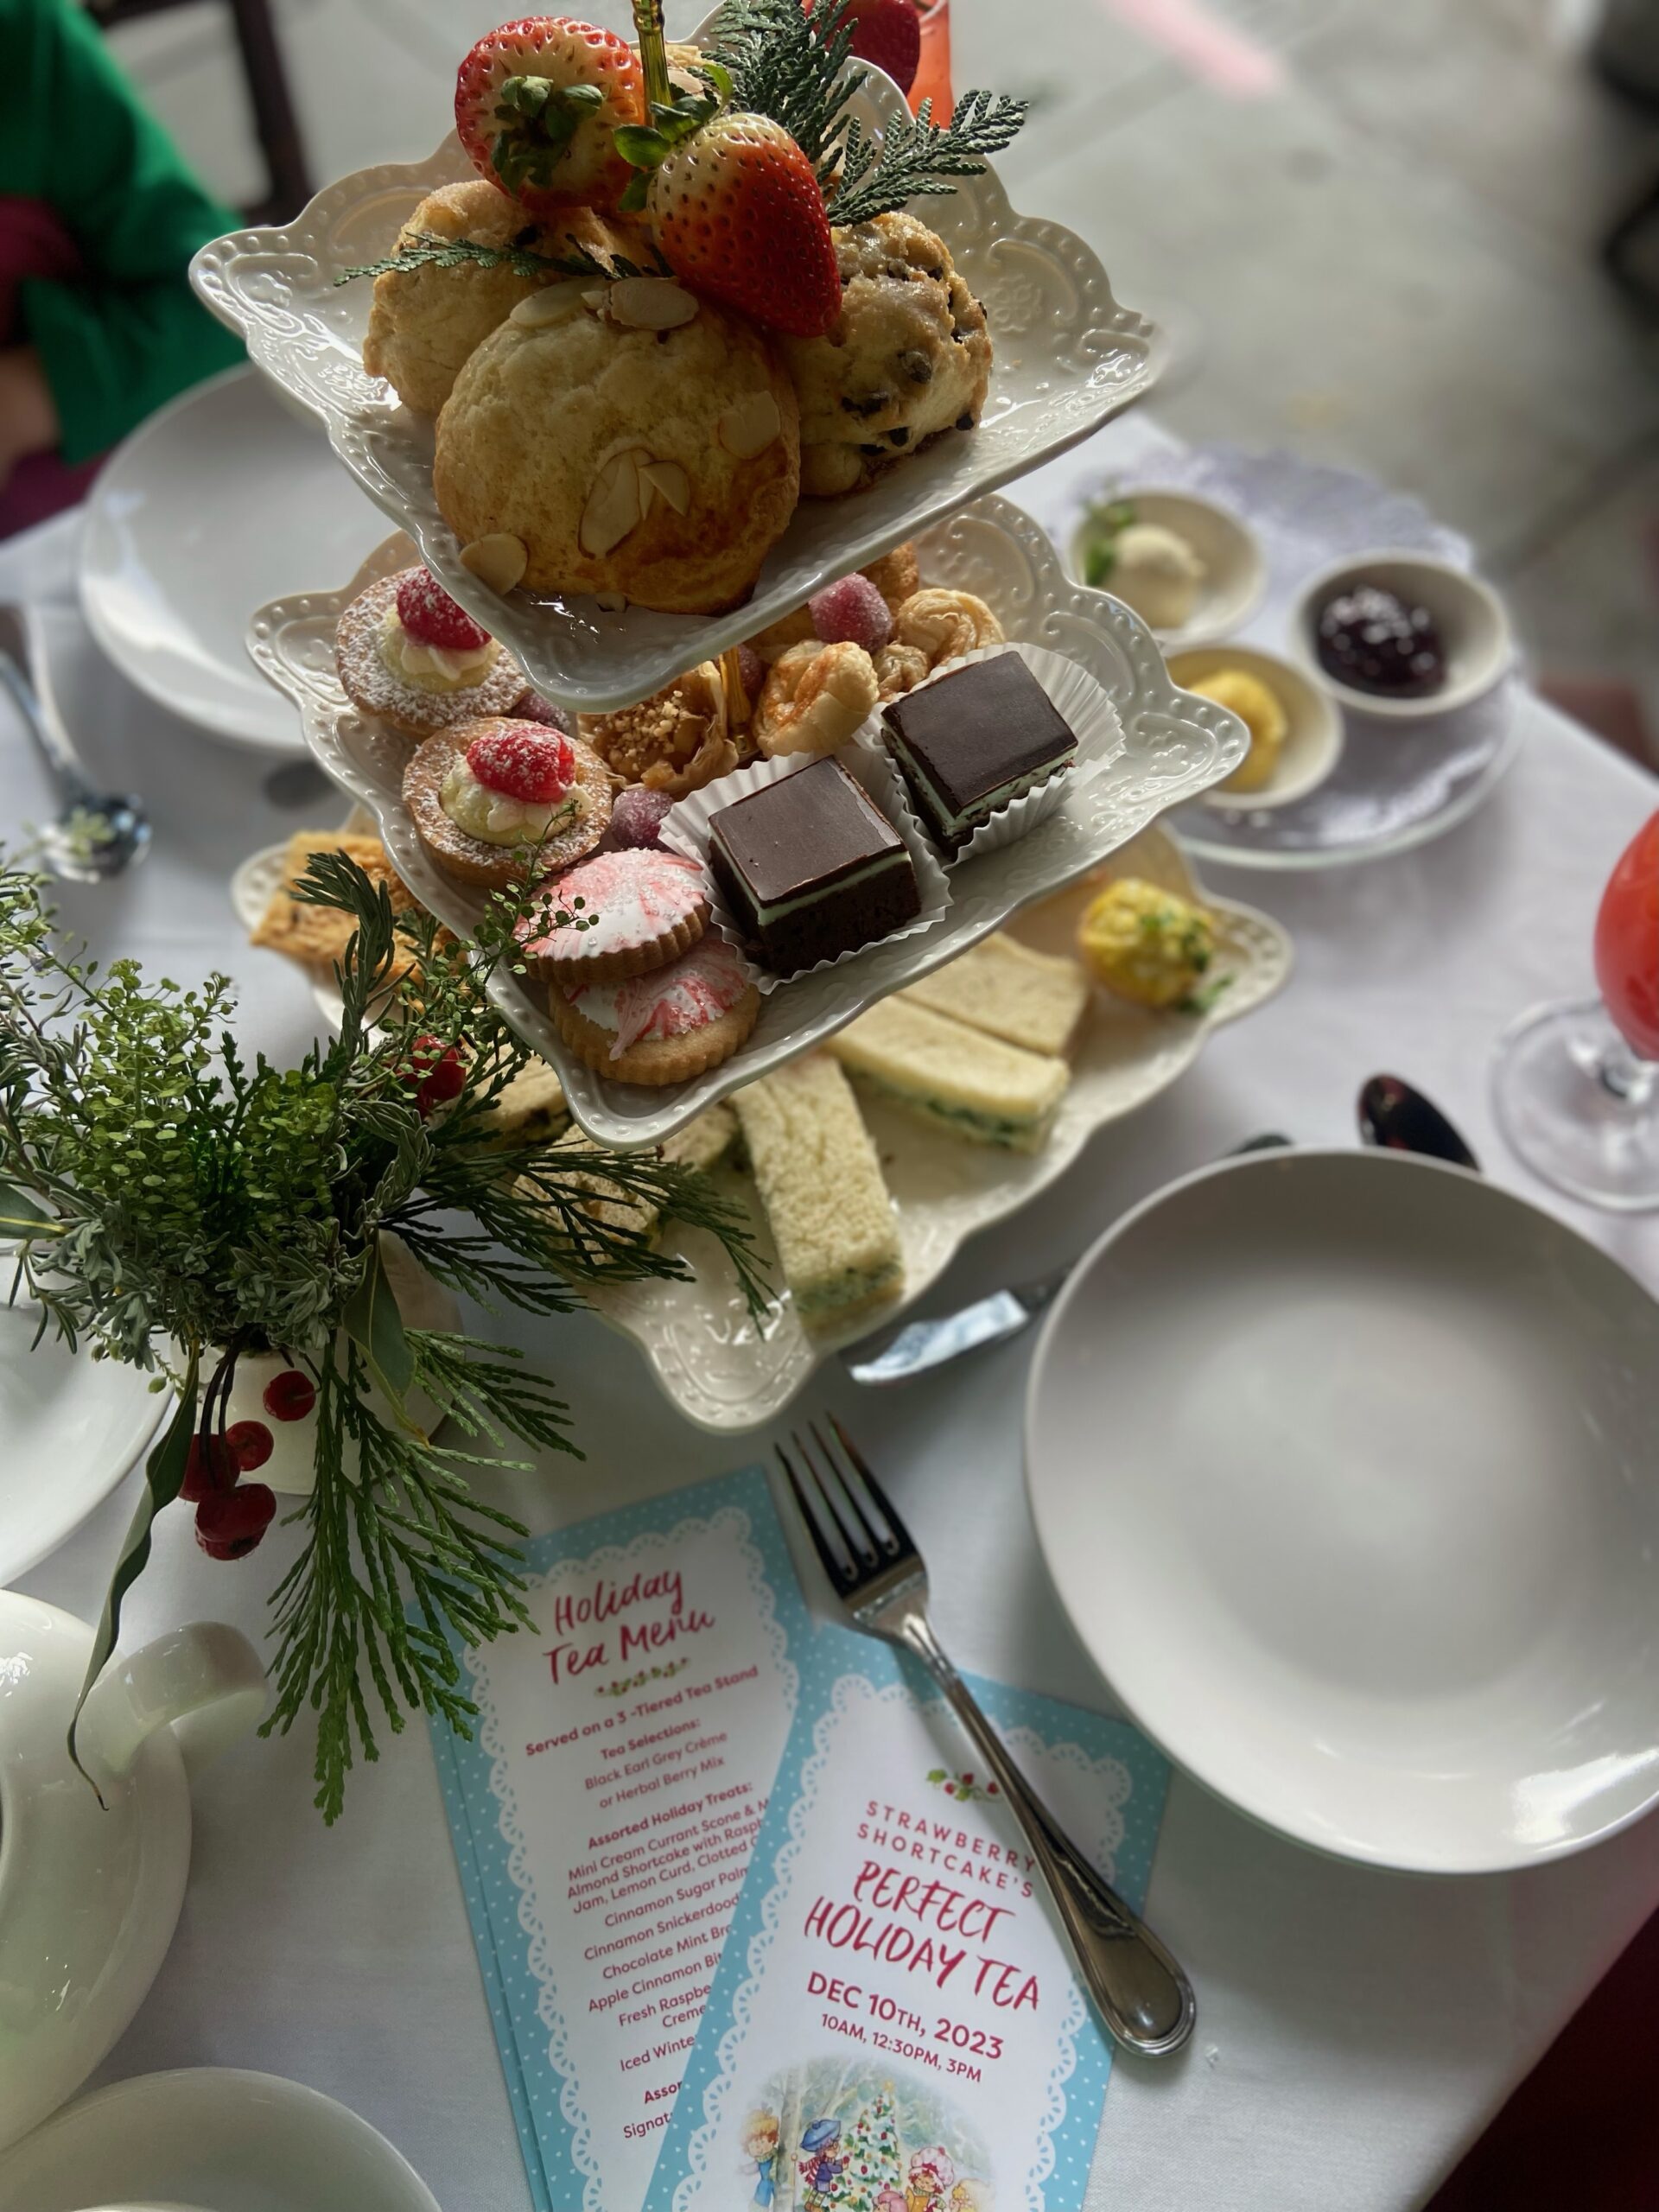 WildBrain’s Strawberry Shortcake Hosts the Perfect Holiday Tea Party at Julienne Fine Foods and Celebrations Café